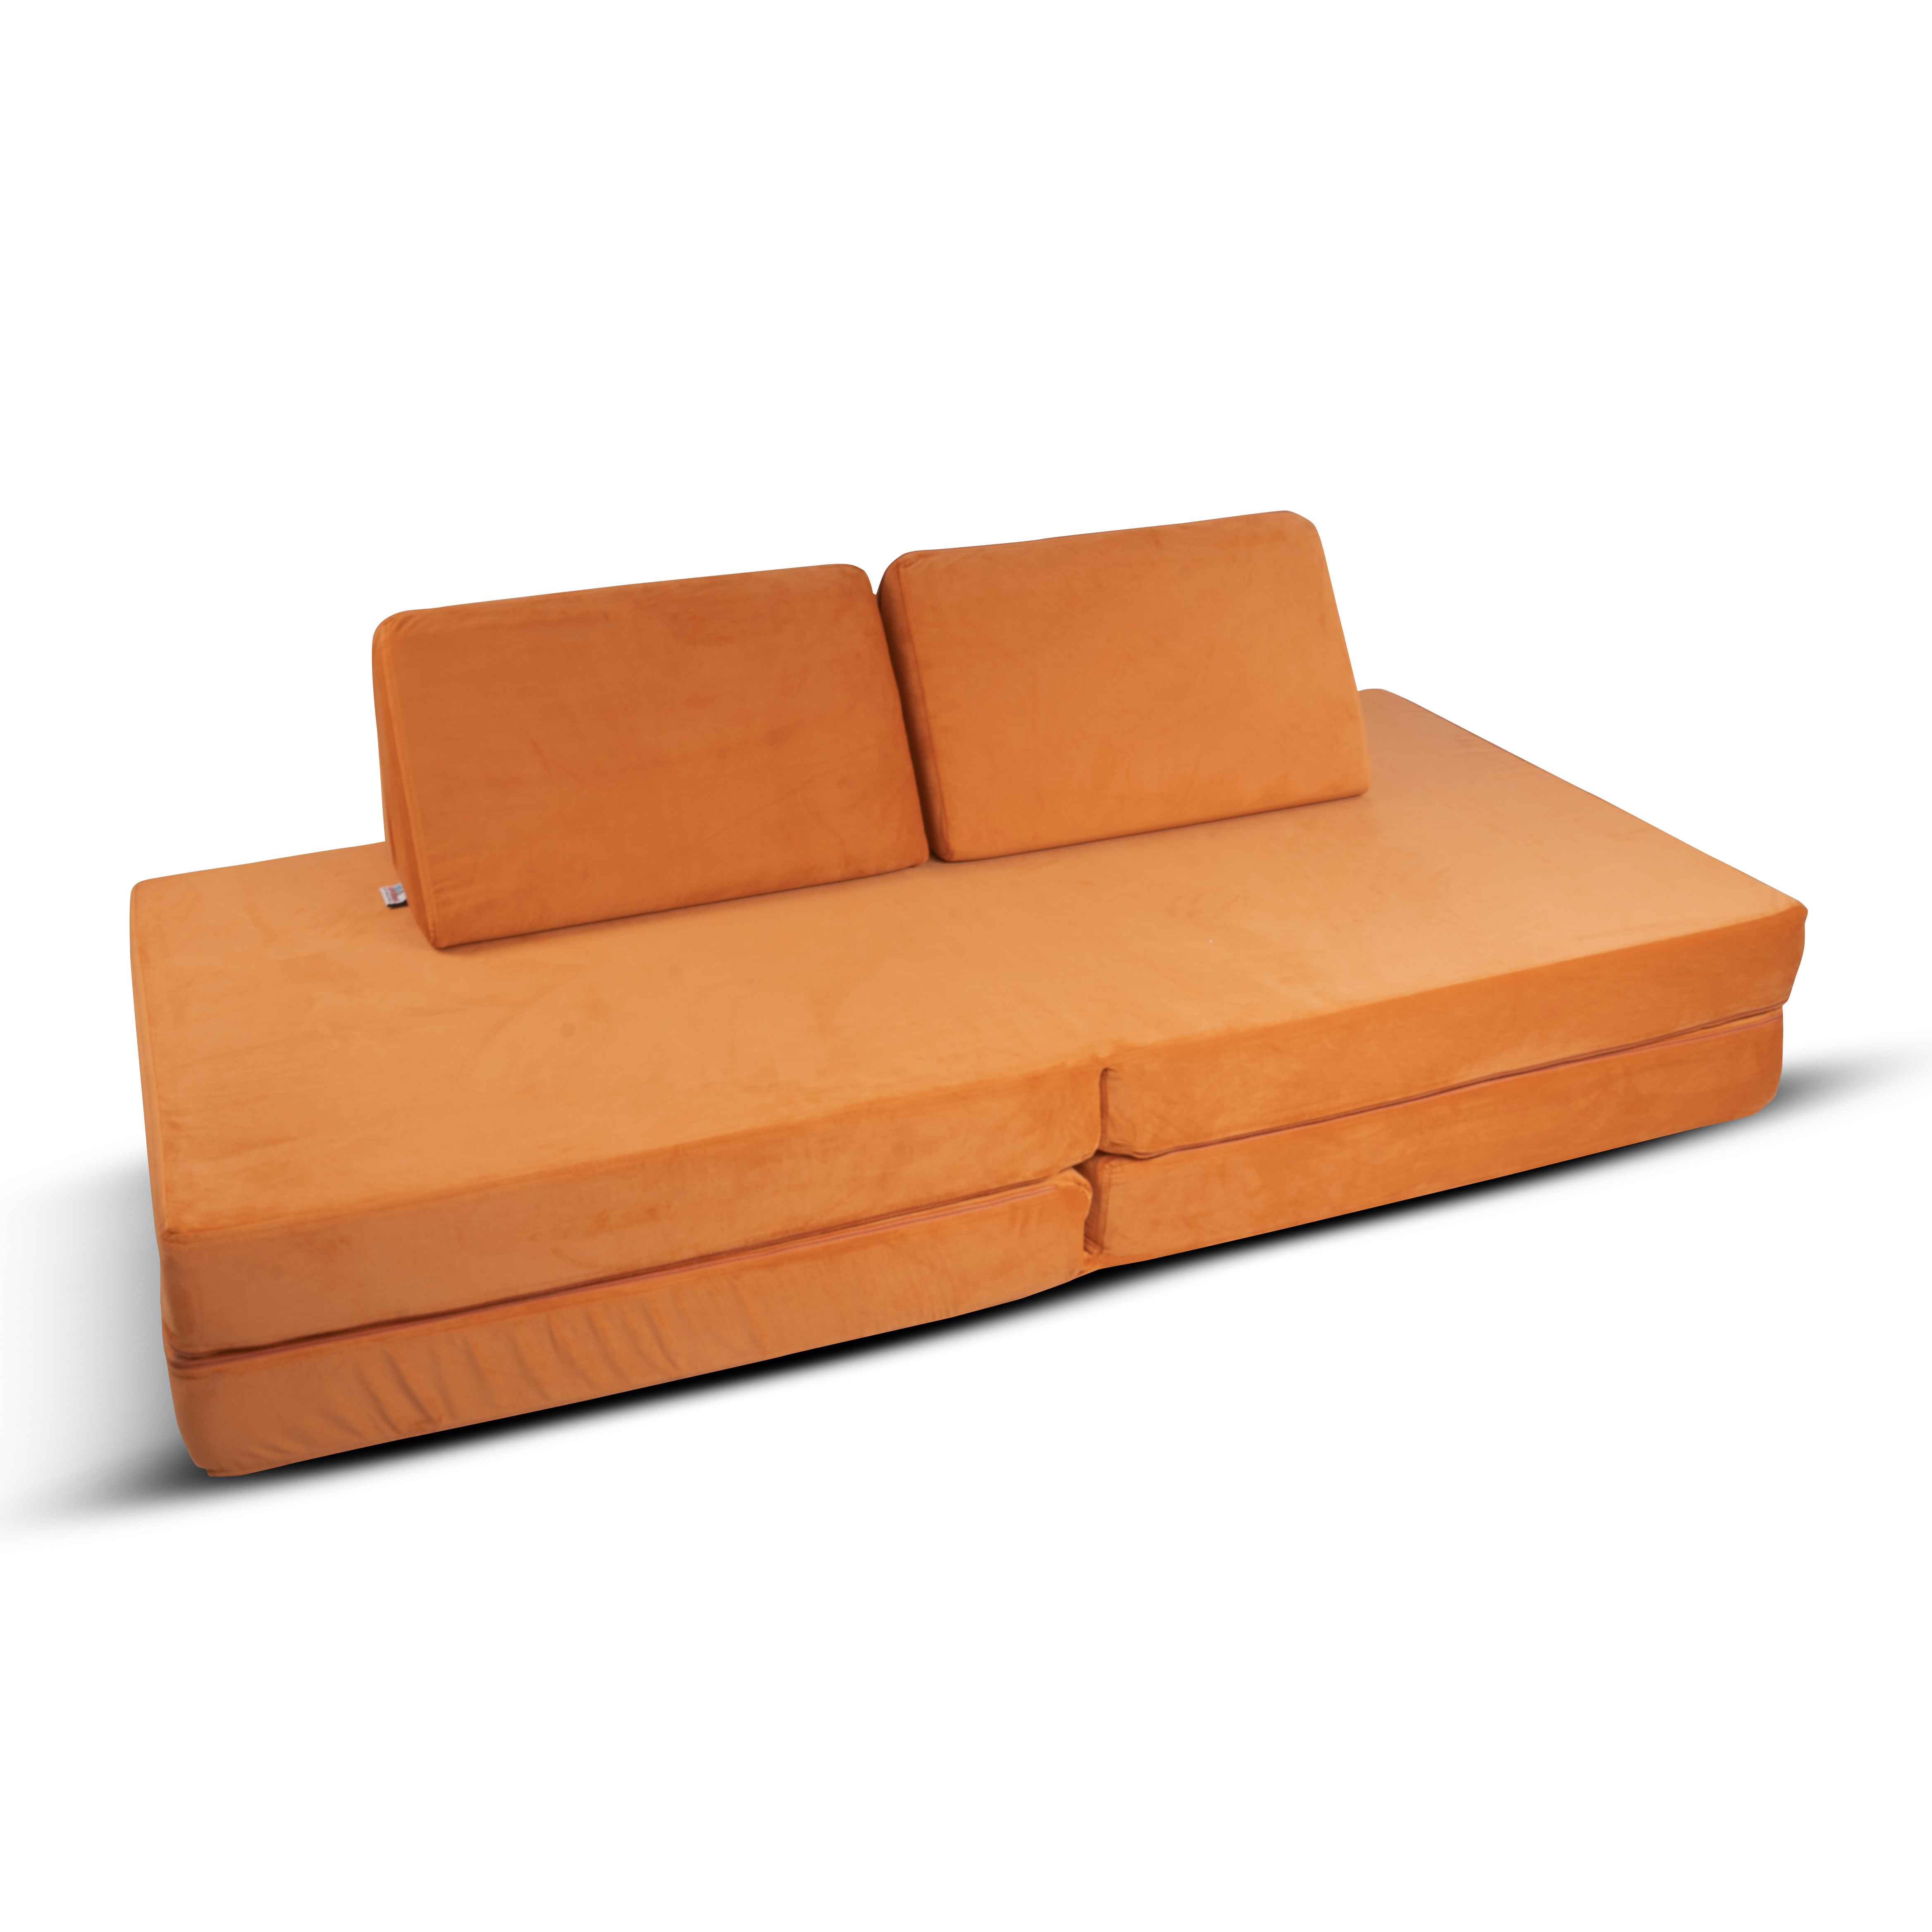 Cosmos Play Couch - Carnival Yellow